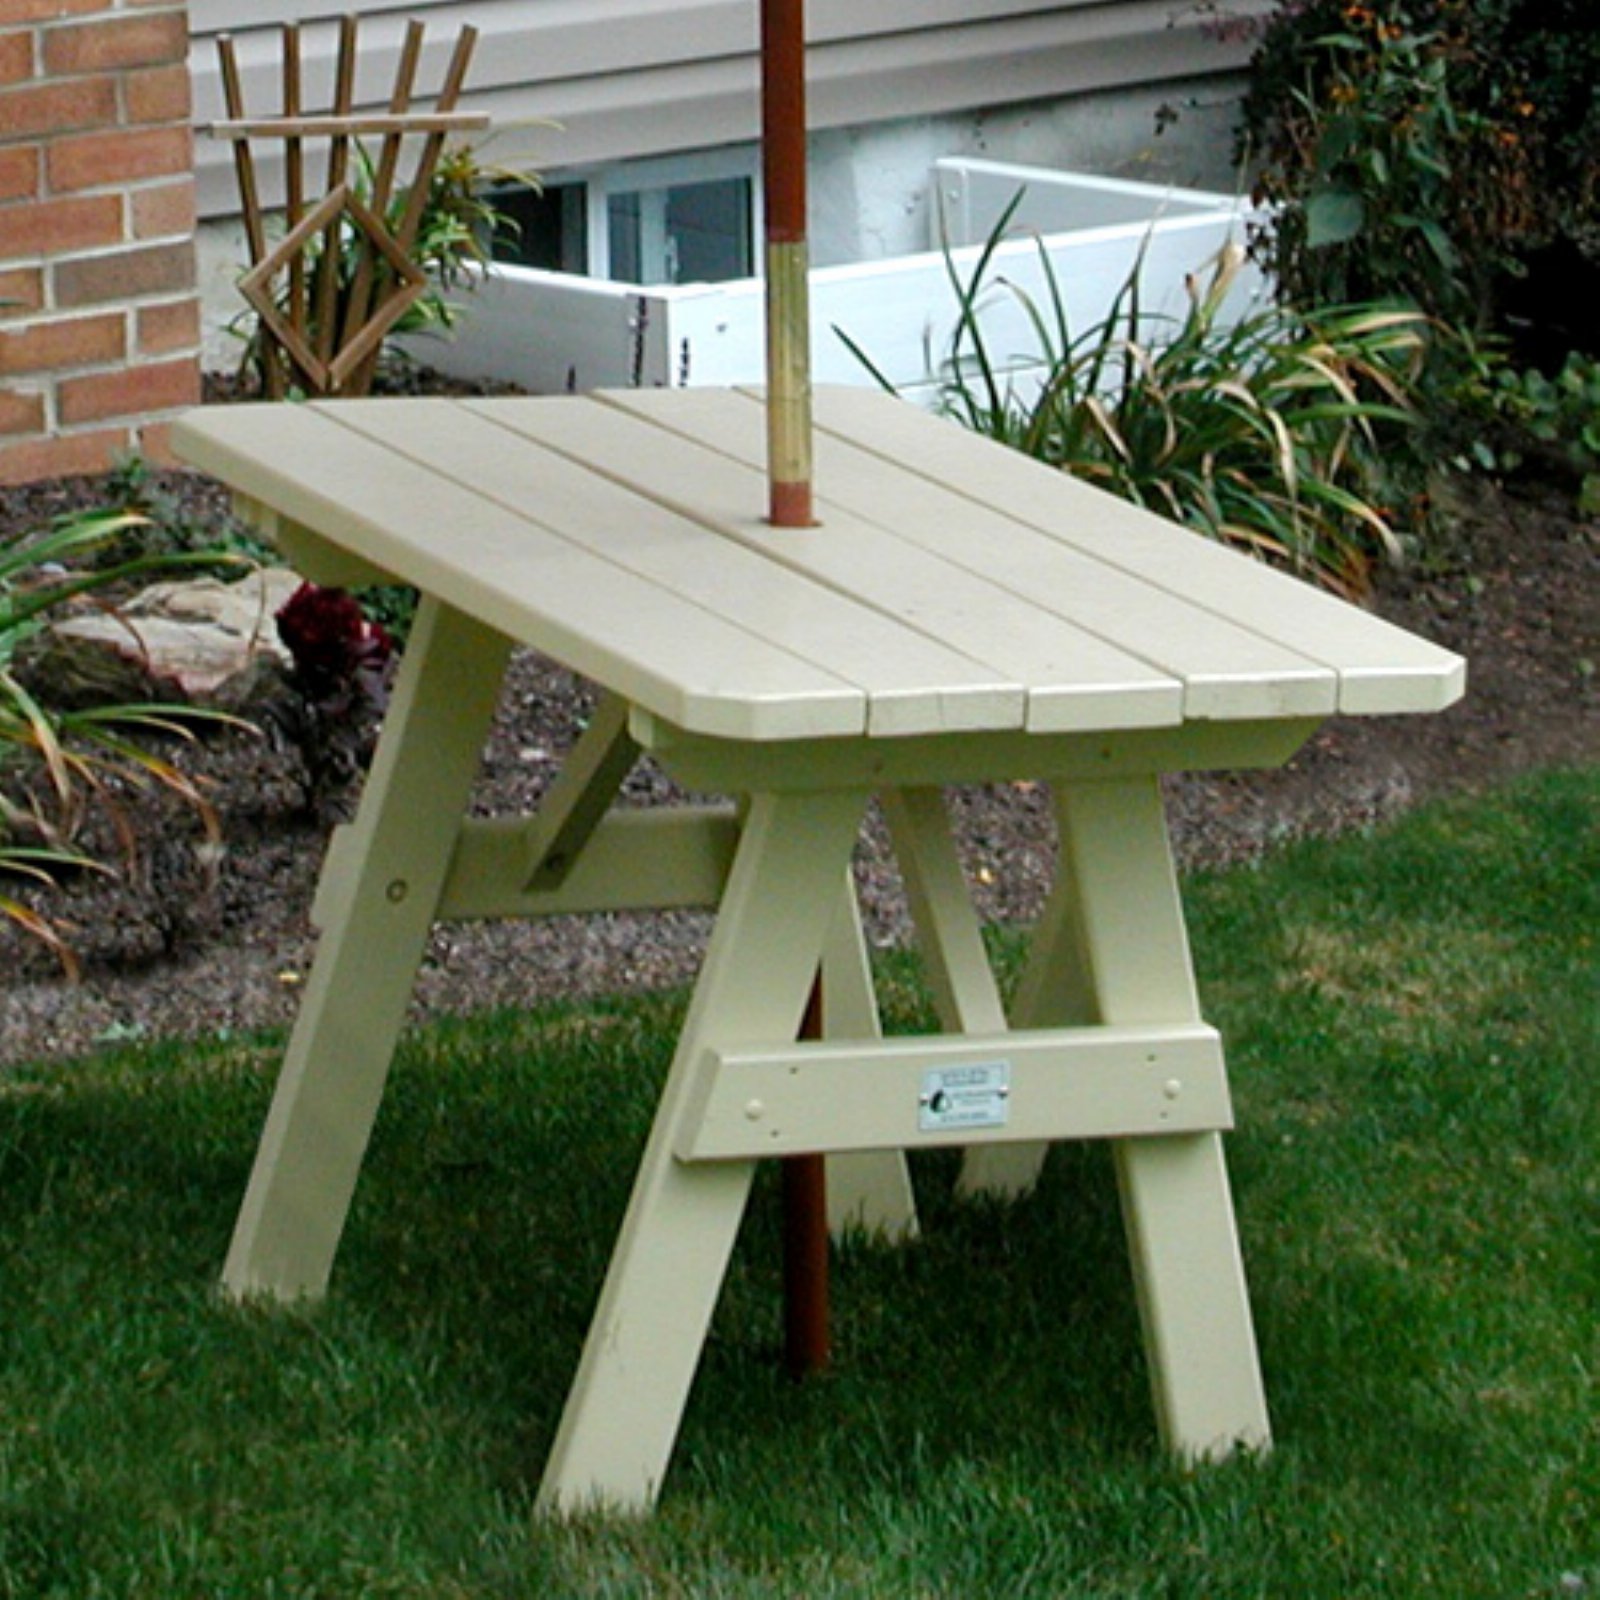 A &amp; L Furniture Yellow Pine Traditional Picnic Table - image 1 of 7